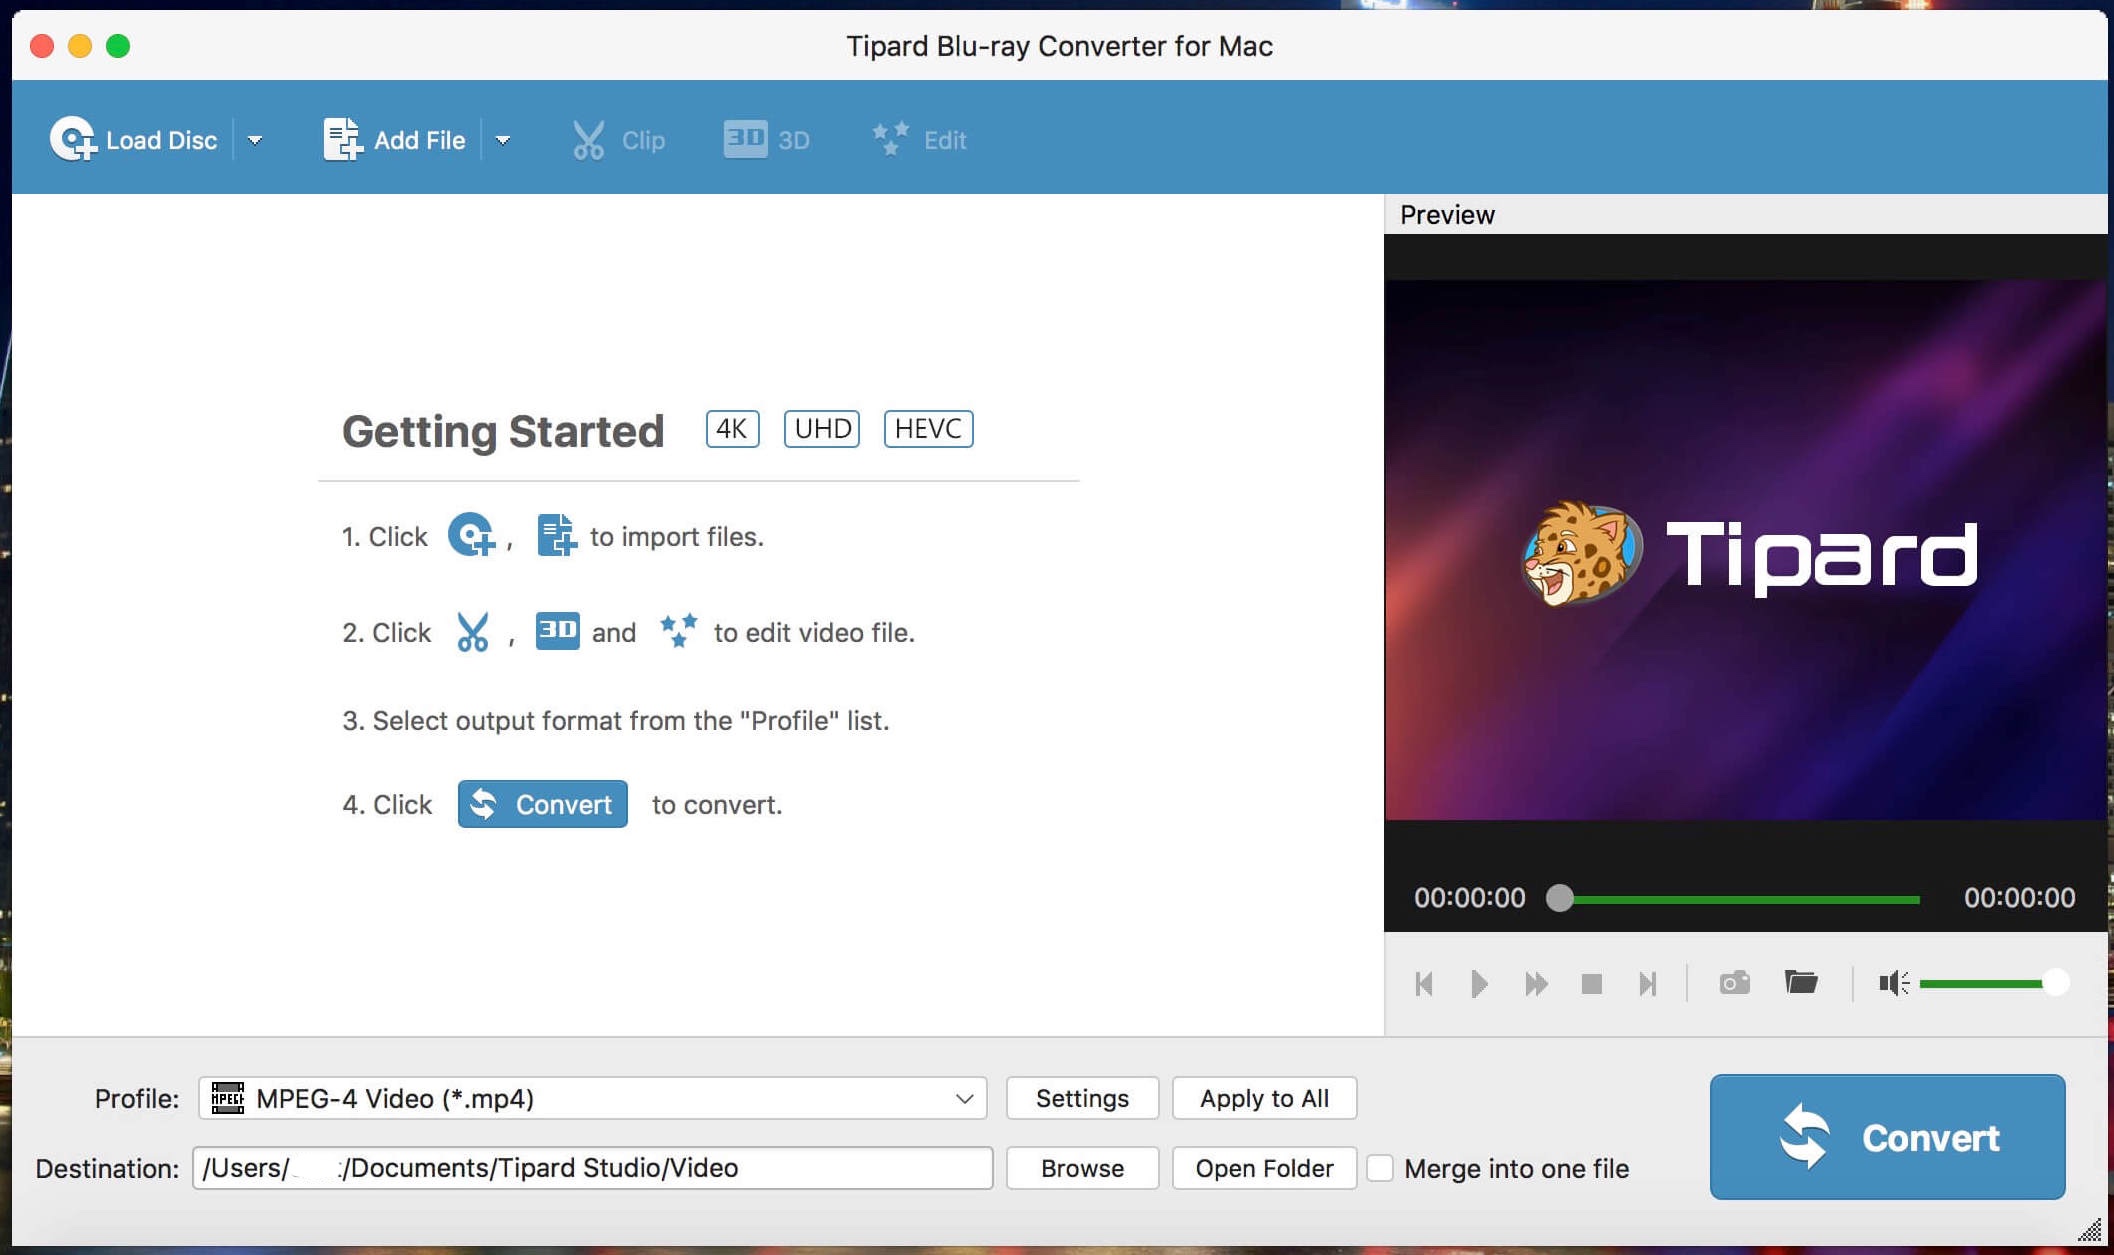 Tipard Blu-ray Converter 10.1.8 instal the new version for windows